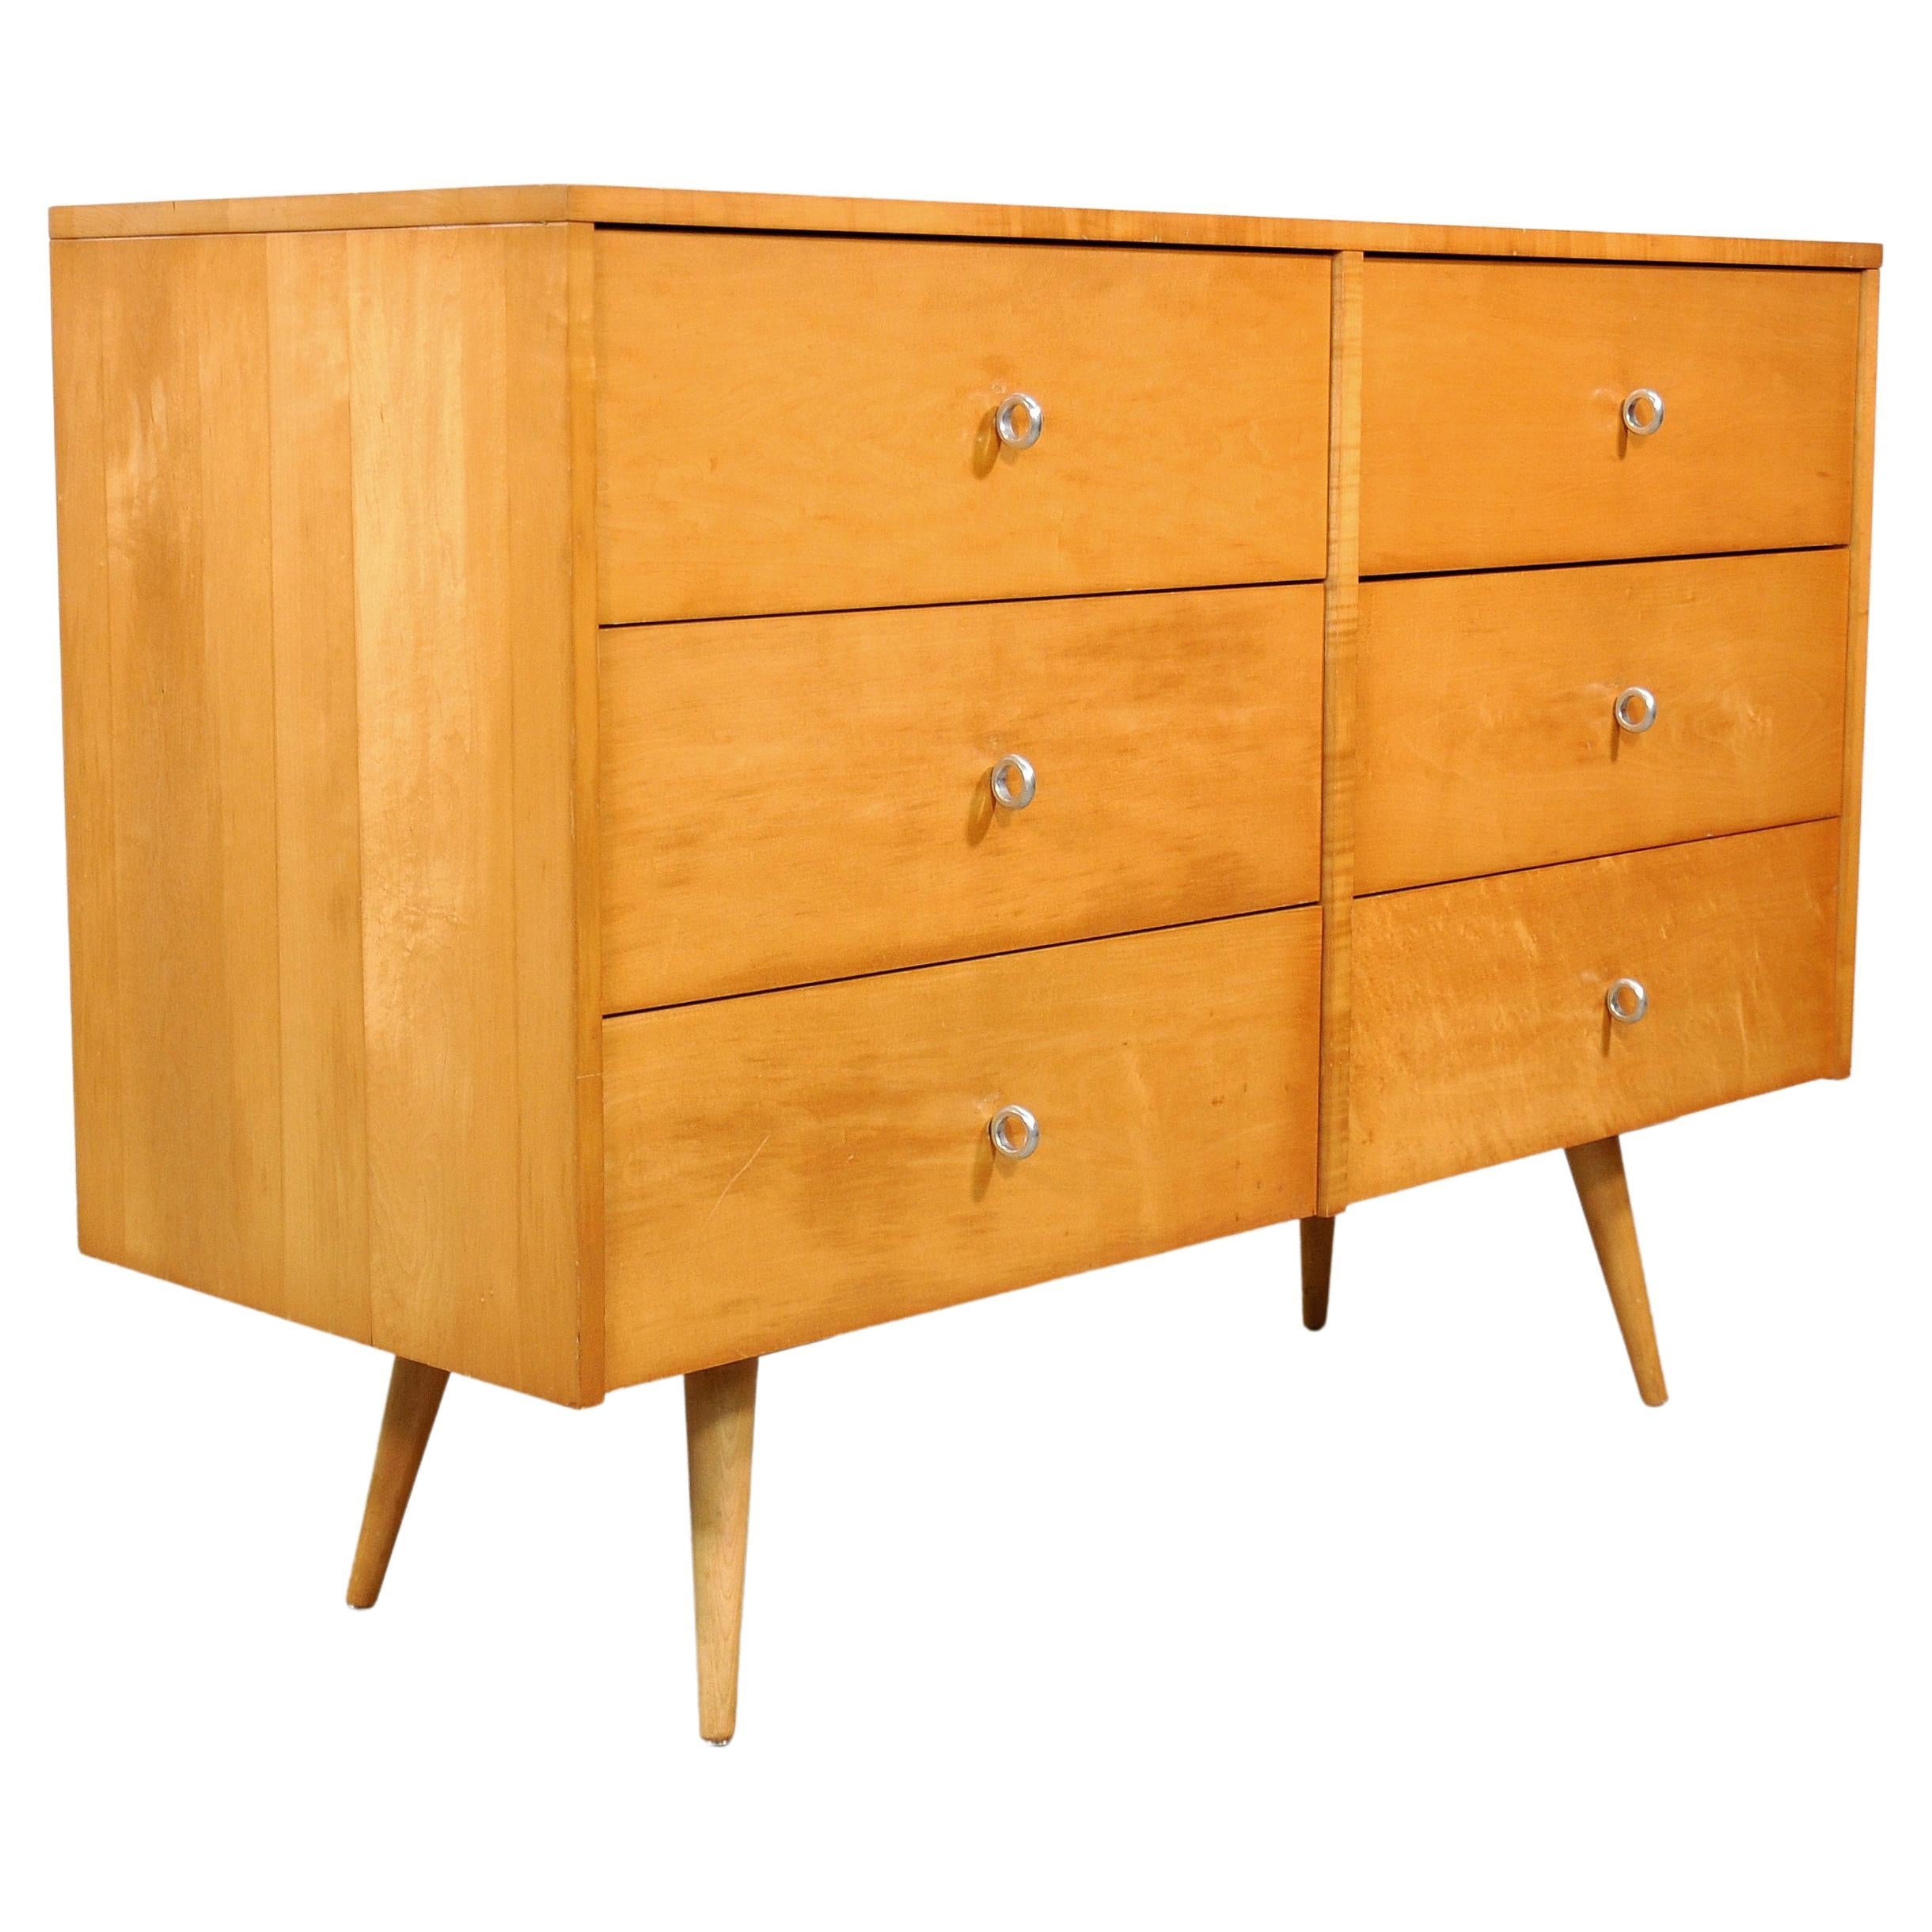 Mid-Century Modern vintage six-drawer dresser model no. 1509 designed by Paul McCobb for his modular Planner Group line made by Winchendon Furniture in the 1950s. The cabinet can be also used as a buffet or server credenza. Made of solid maple